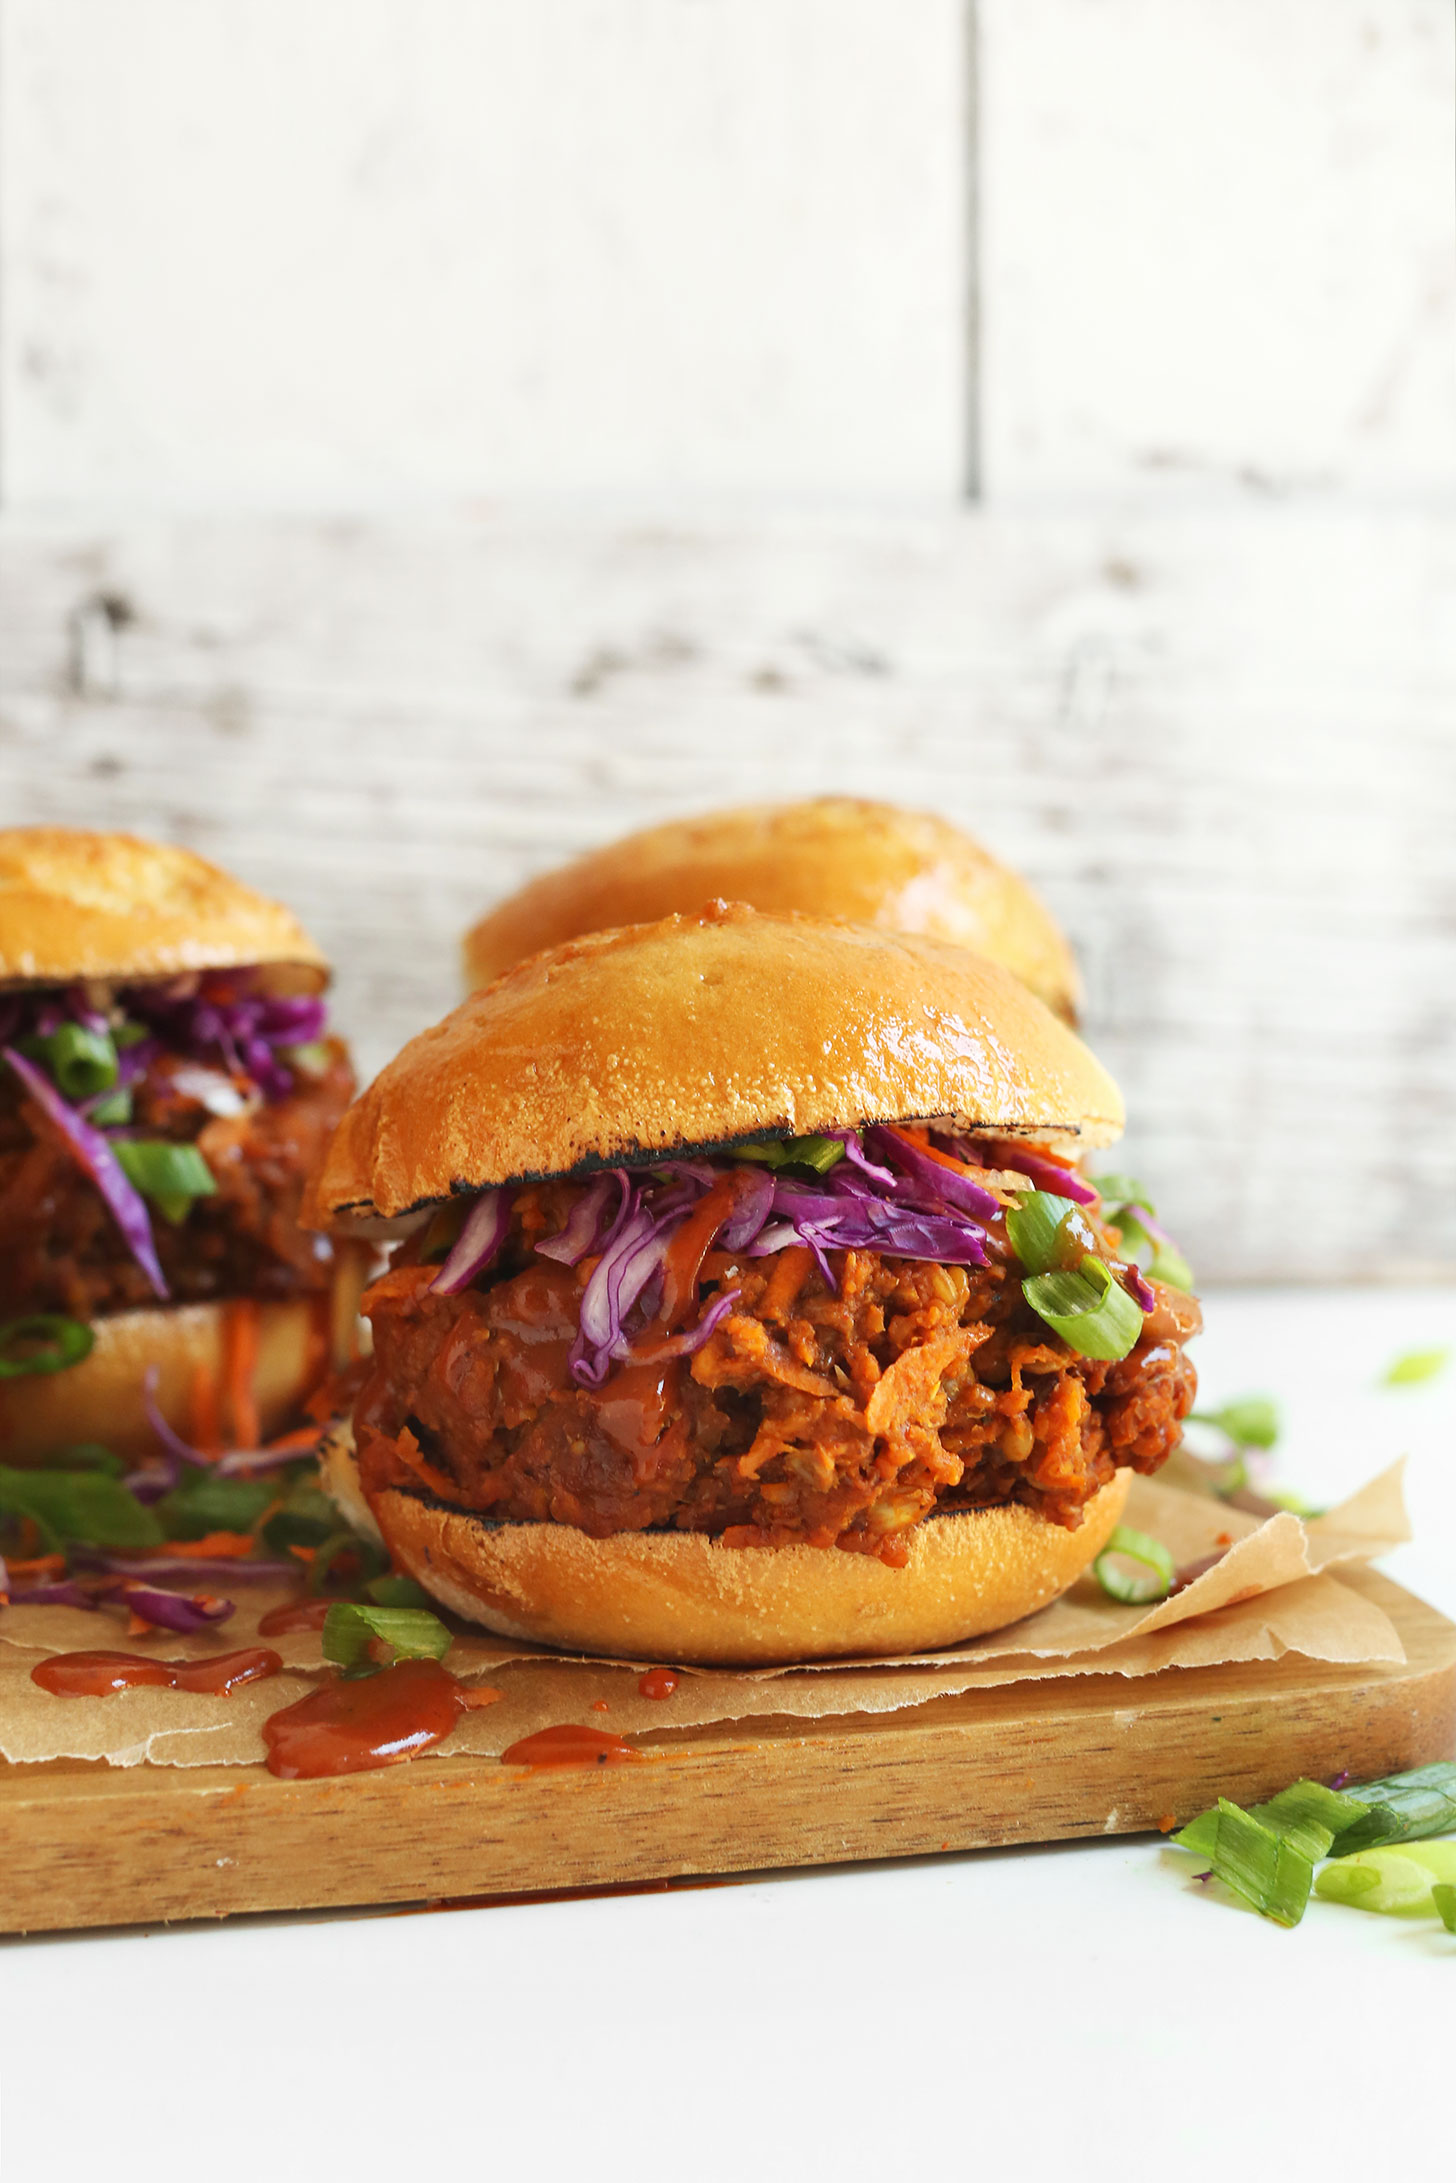 Cutting board filled with Vegan Pulled Pork Sandwiches for a delicious vegan BBQ recipe